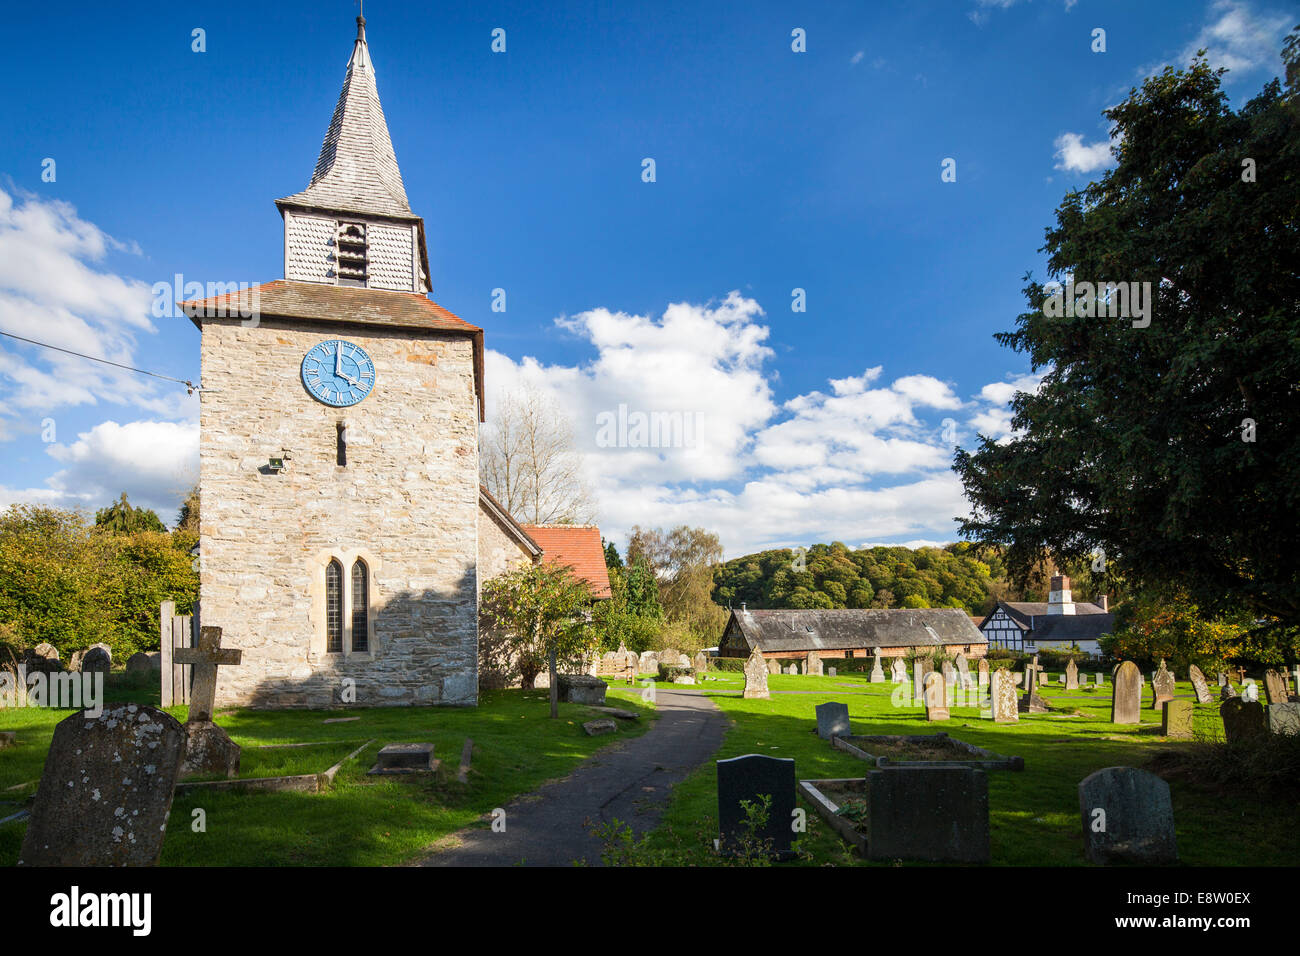 St. Michael & All Angels' Church Lingen village Herefordshire England UK Stock Photo